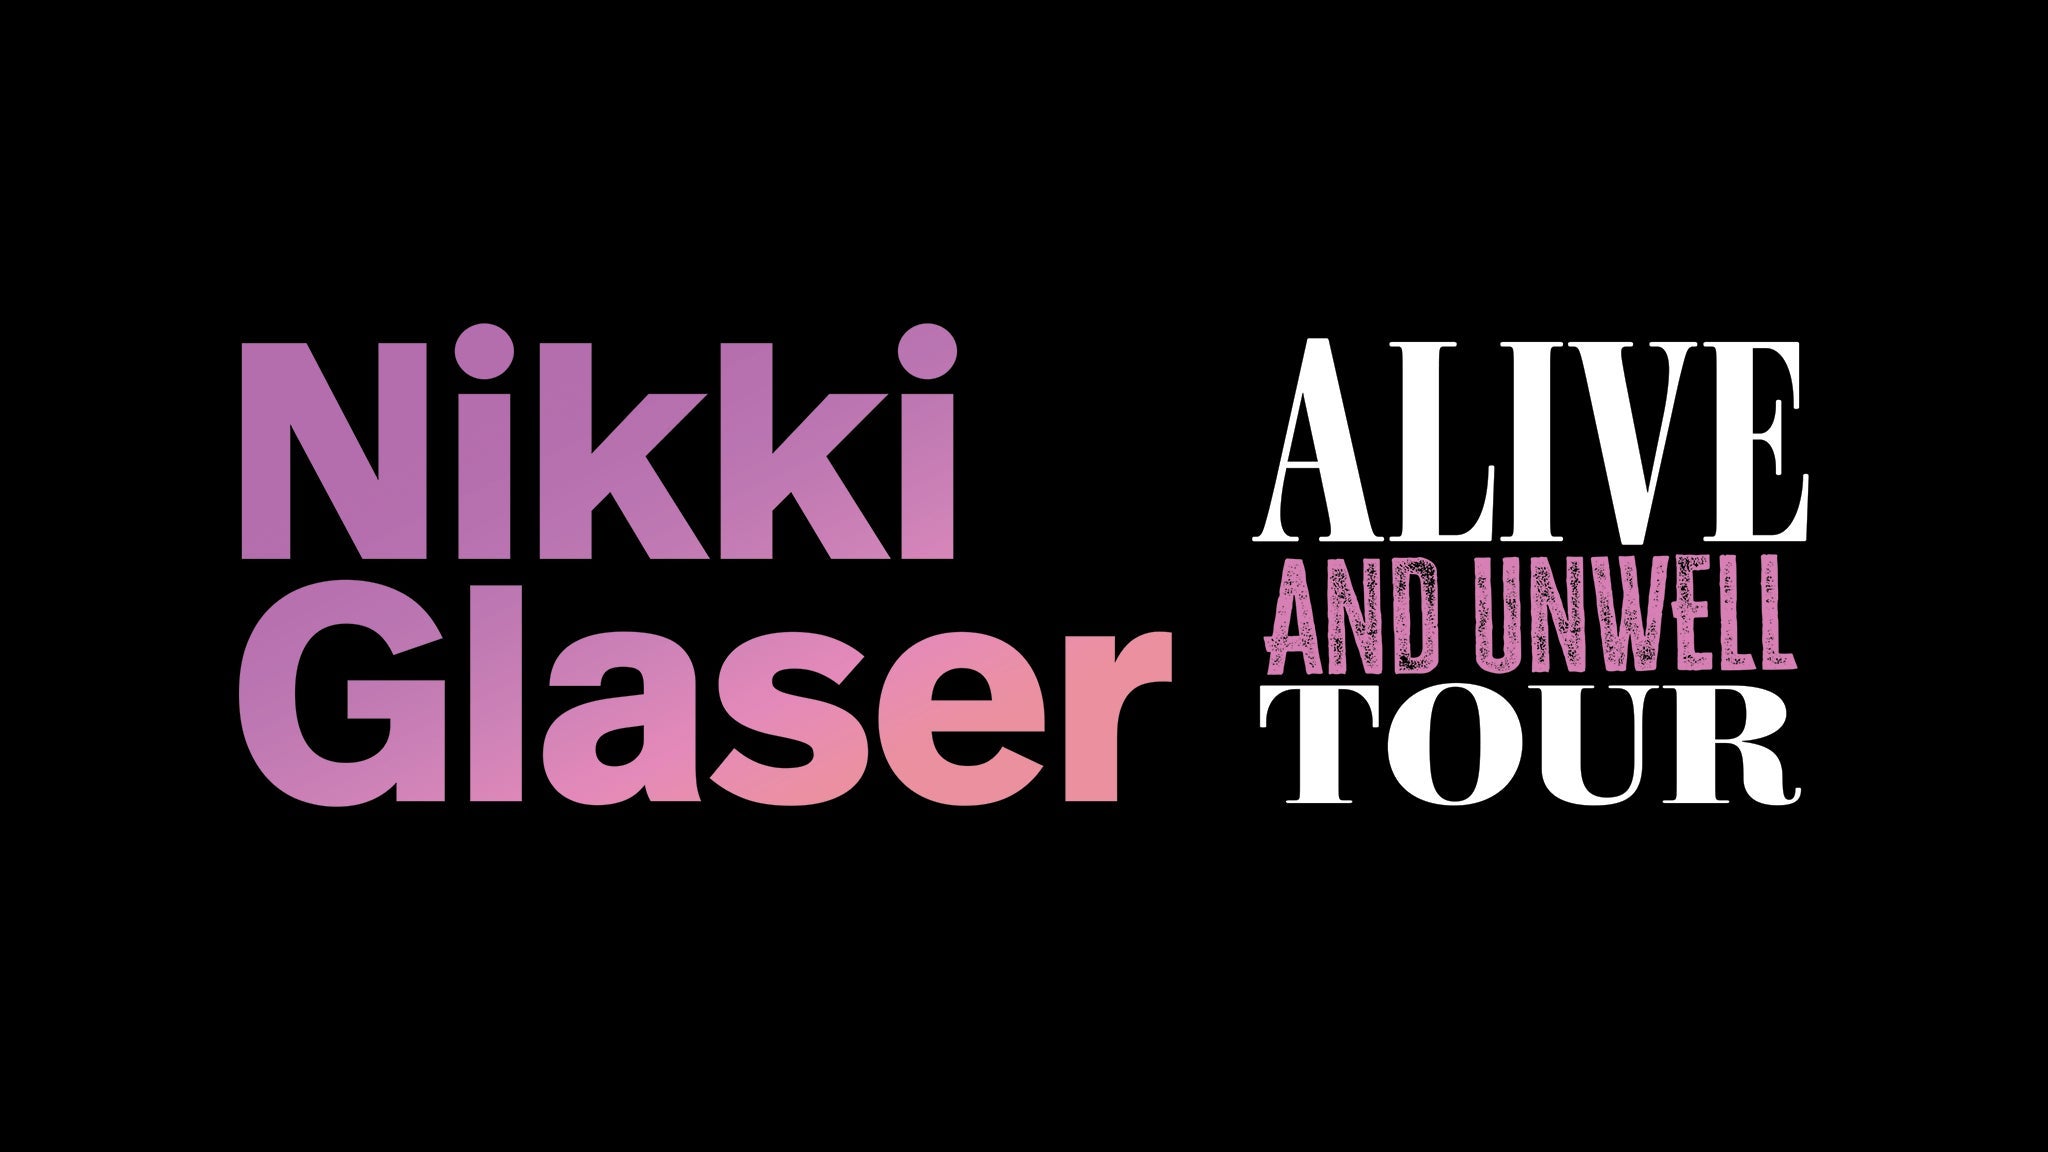 Nikki Glaser: Alive And Unwell Tour in Baraboo promo photo for Artist presale offer code